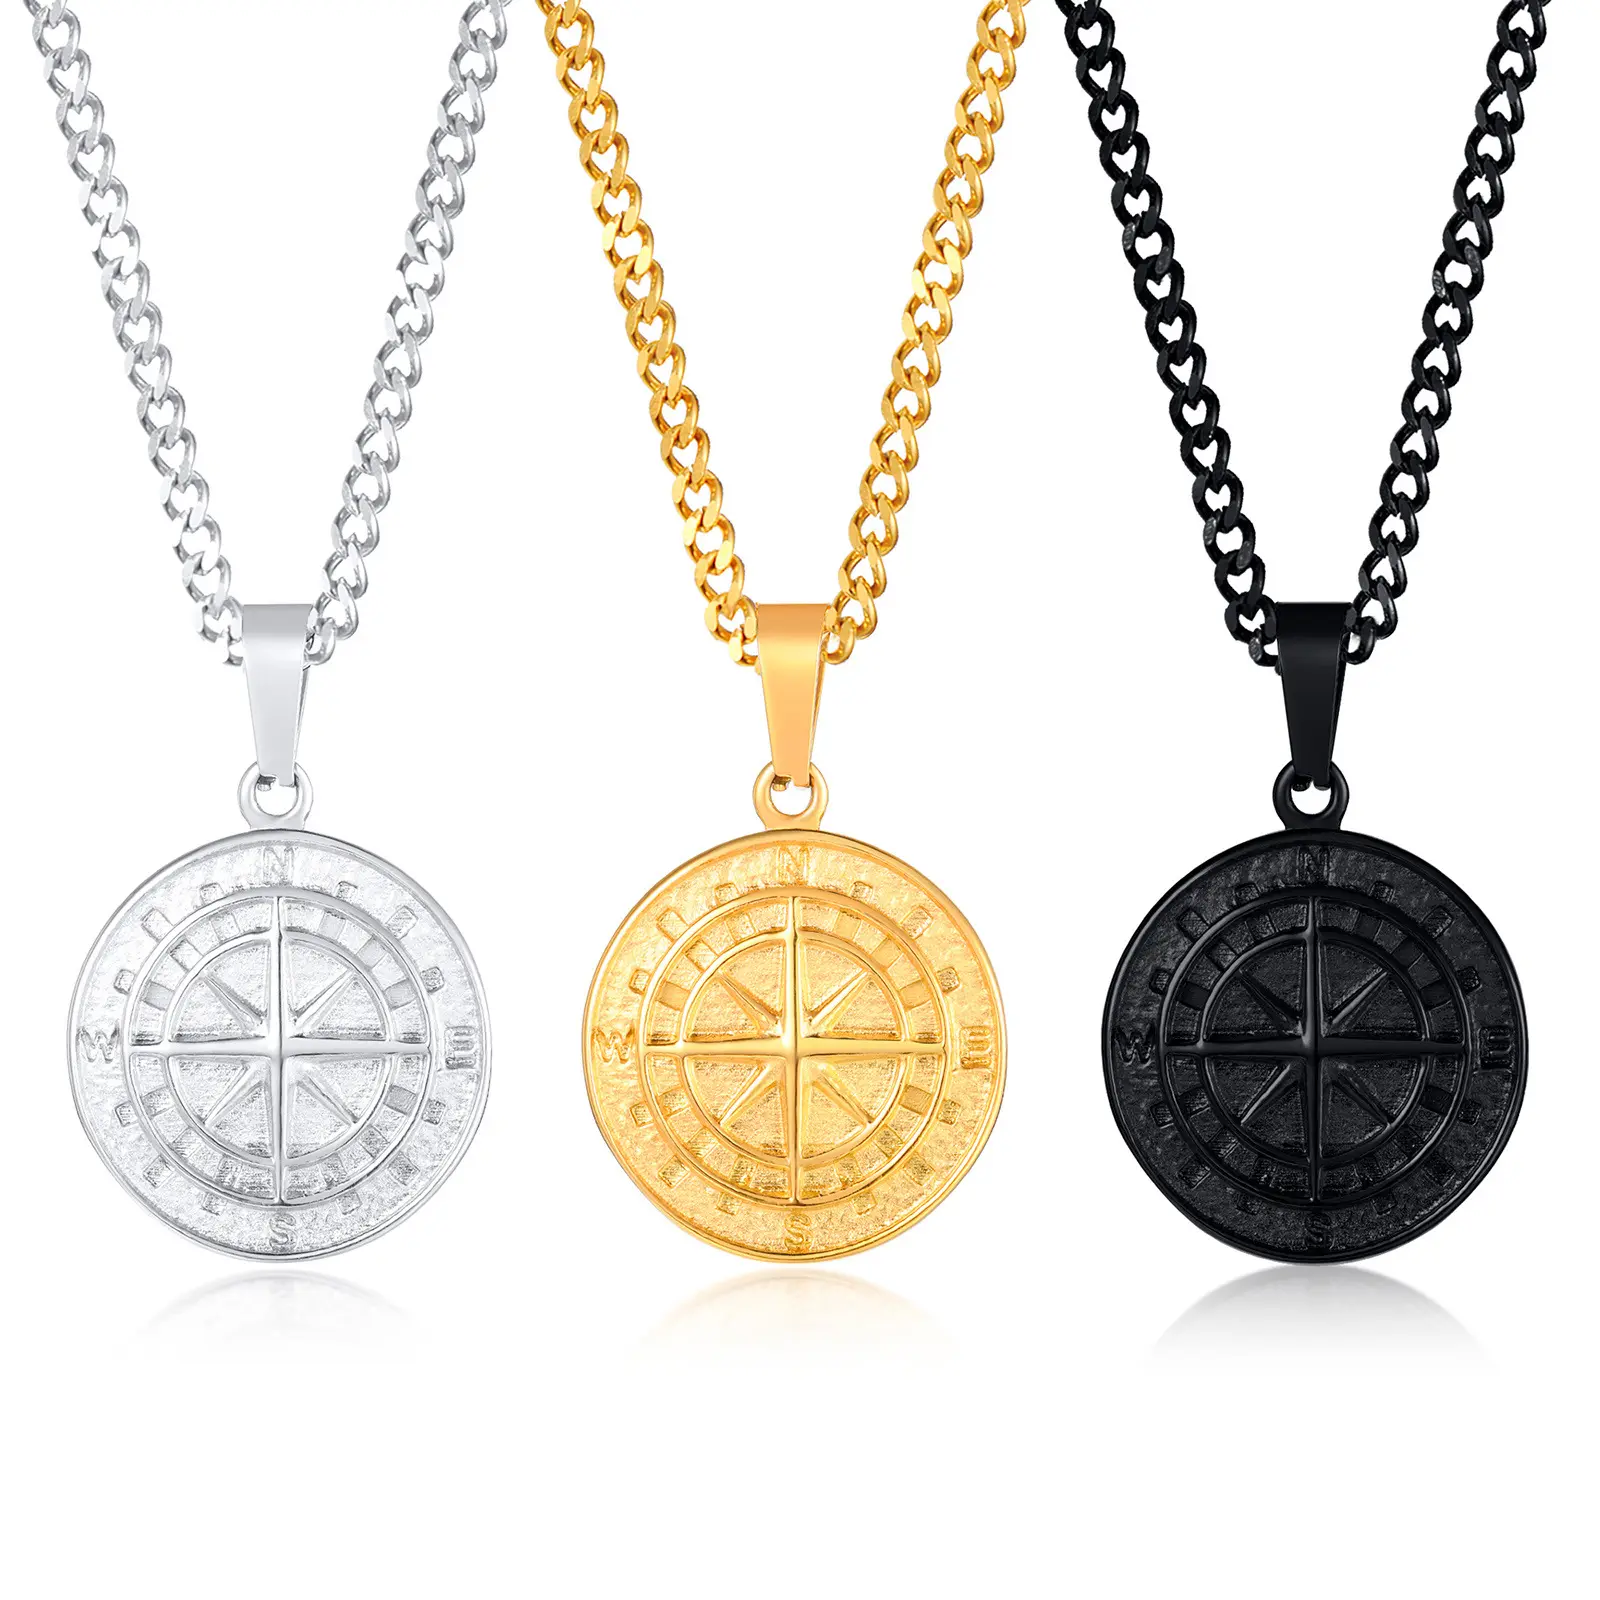 Cinmo Stainless Steel Compass Pendant Gold Coin Compass Men's Hip Hop Necklace Jewelry Wholesale